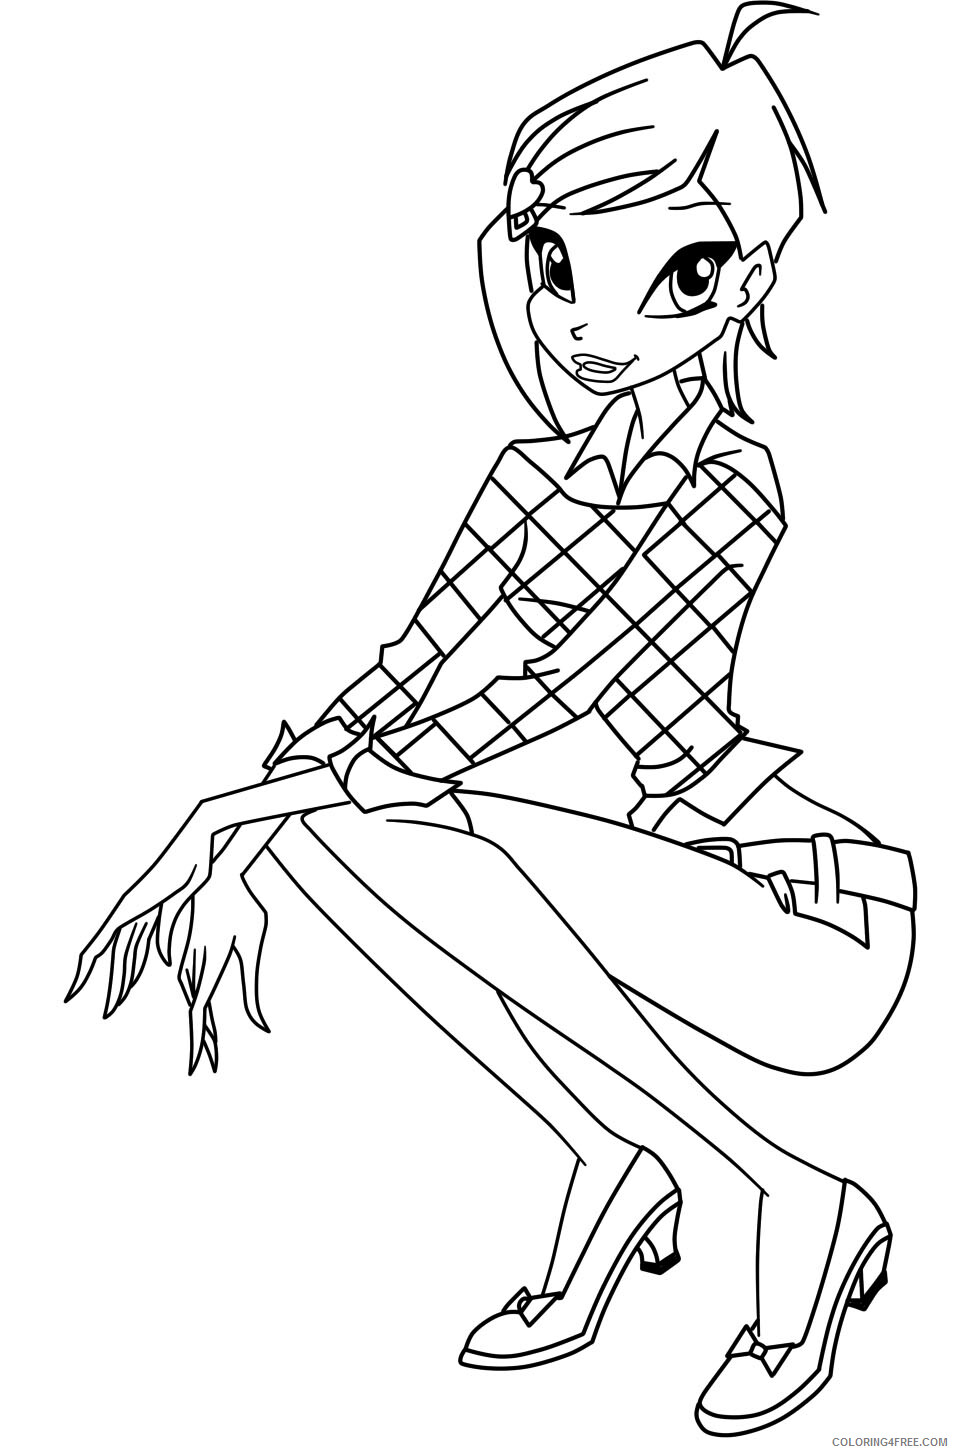 Winx Club Coloring Pages TV Film Winx Club Musa Printable 2020 11521 Coloring4free